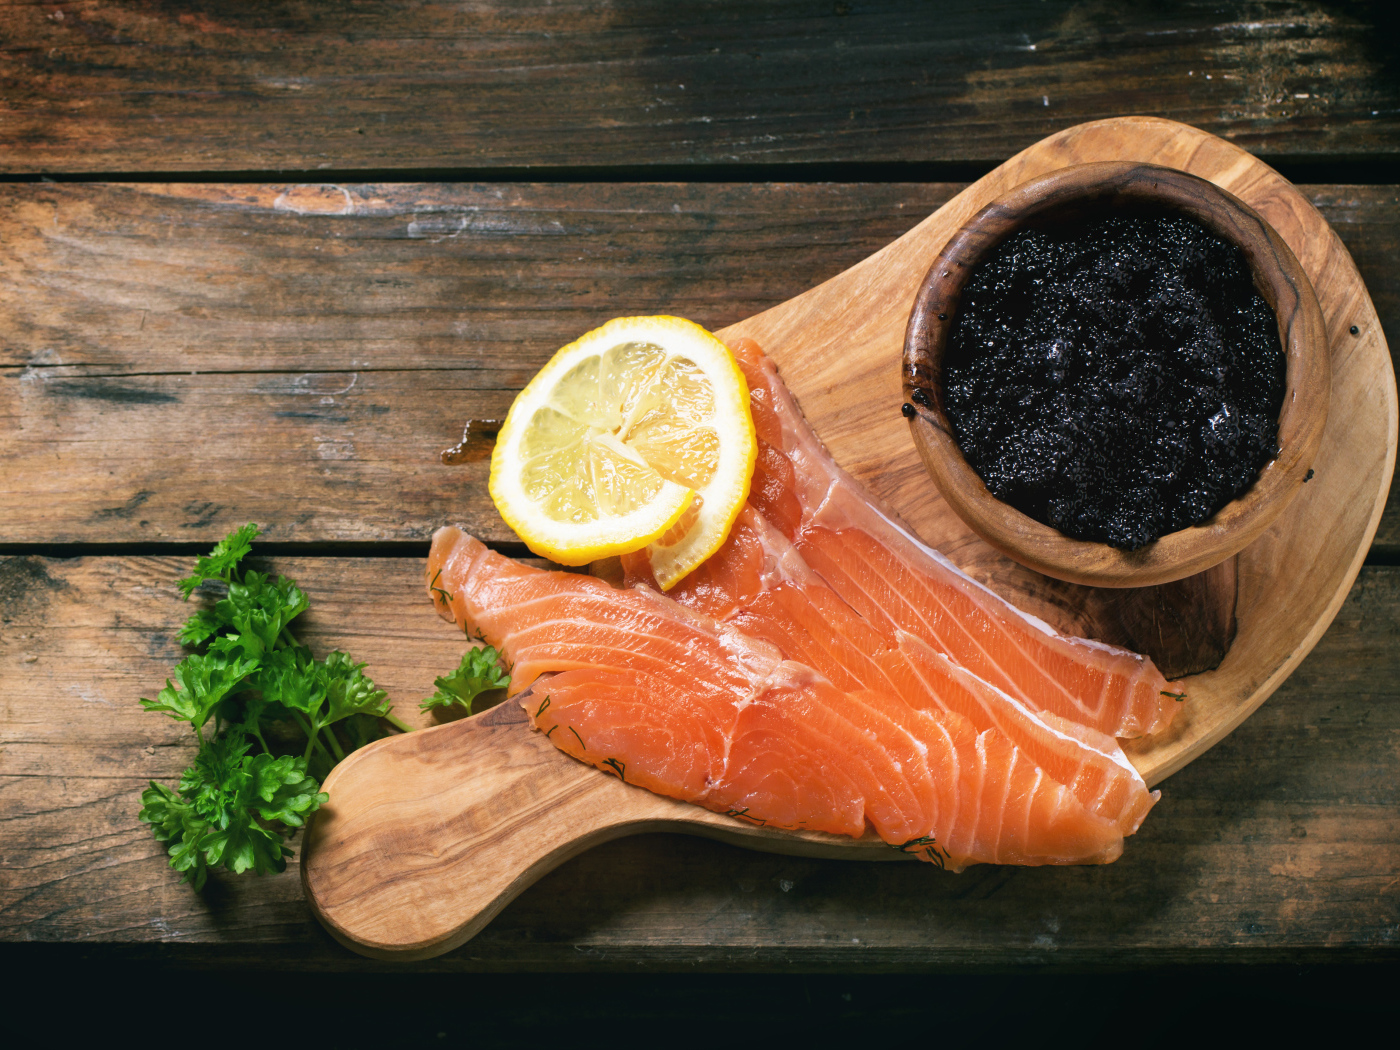 Slices of red fish with lemon on a table with black caviar